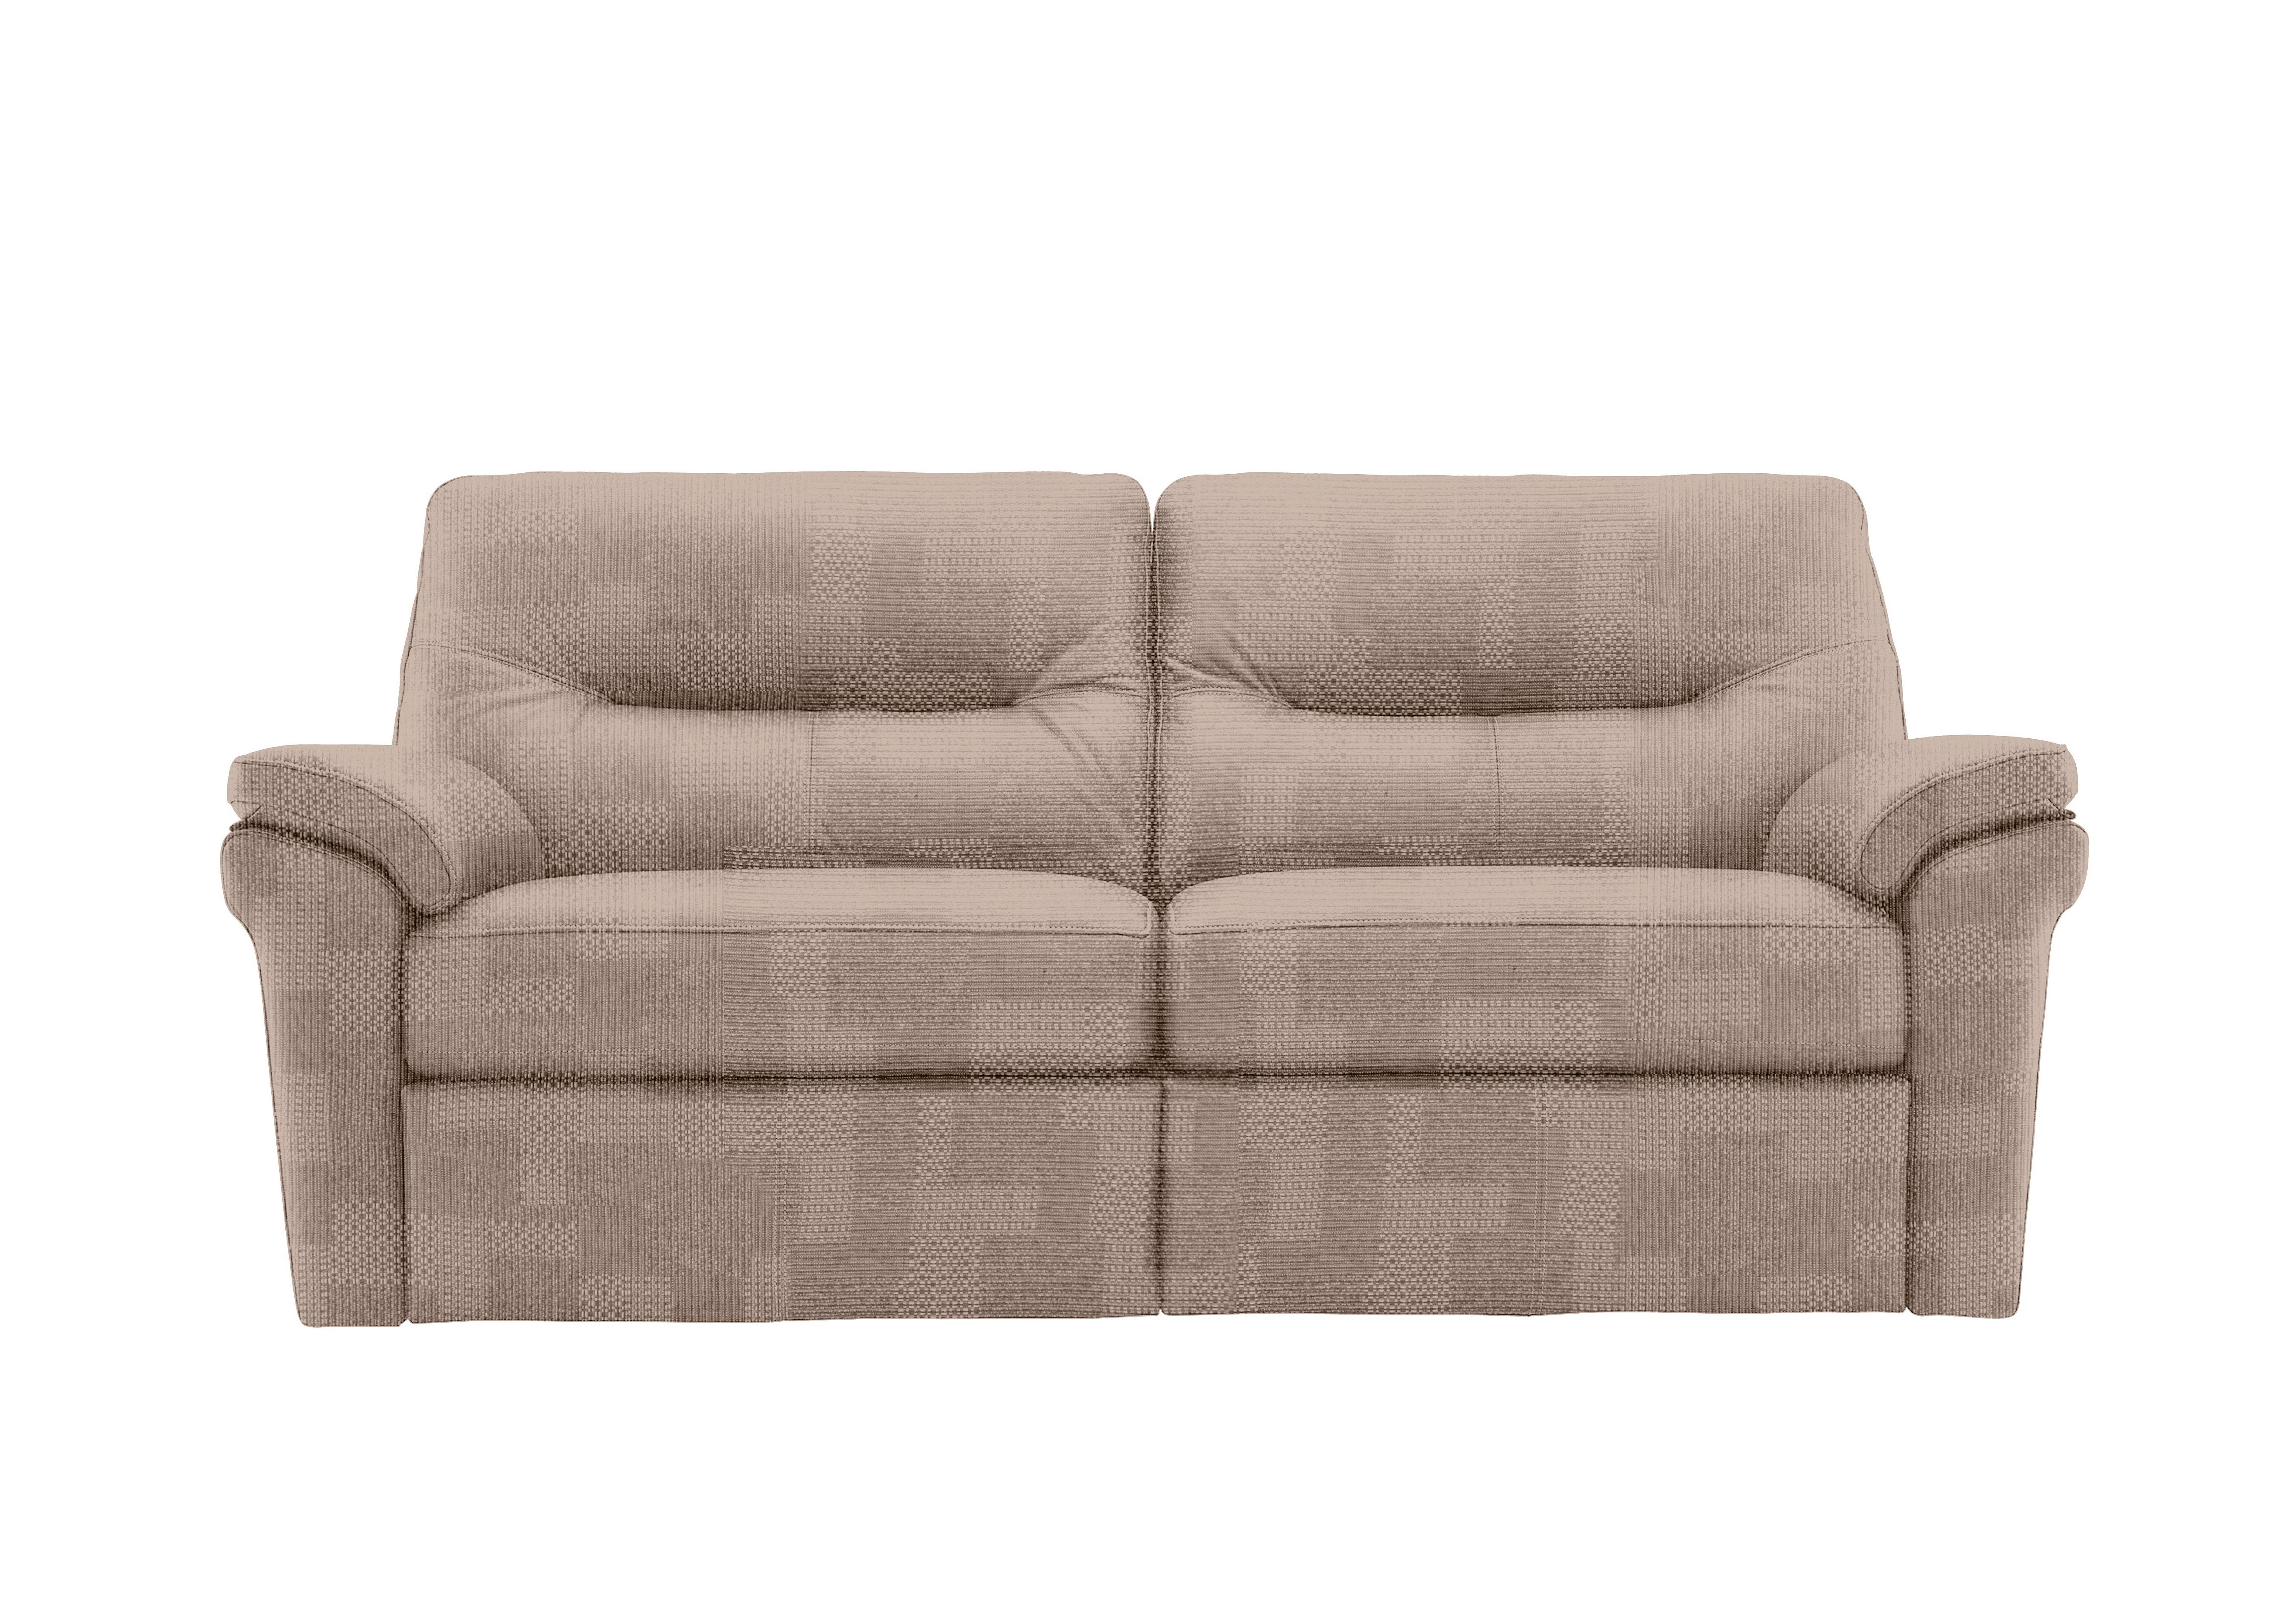 Seattle 2 Seater Fabric Power Recliner Sofa with Power Lumbar in A800 Faro Sand on Furniture Village